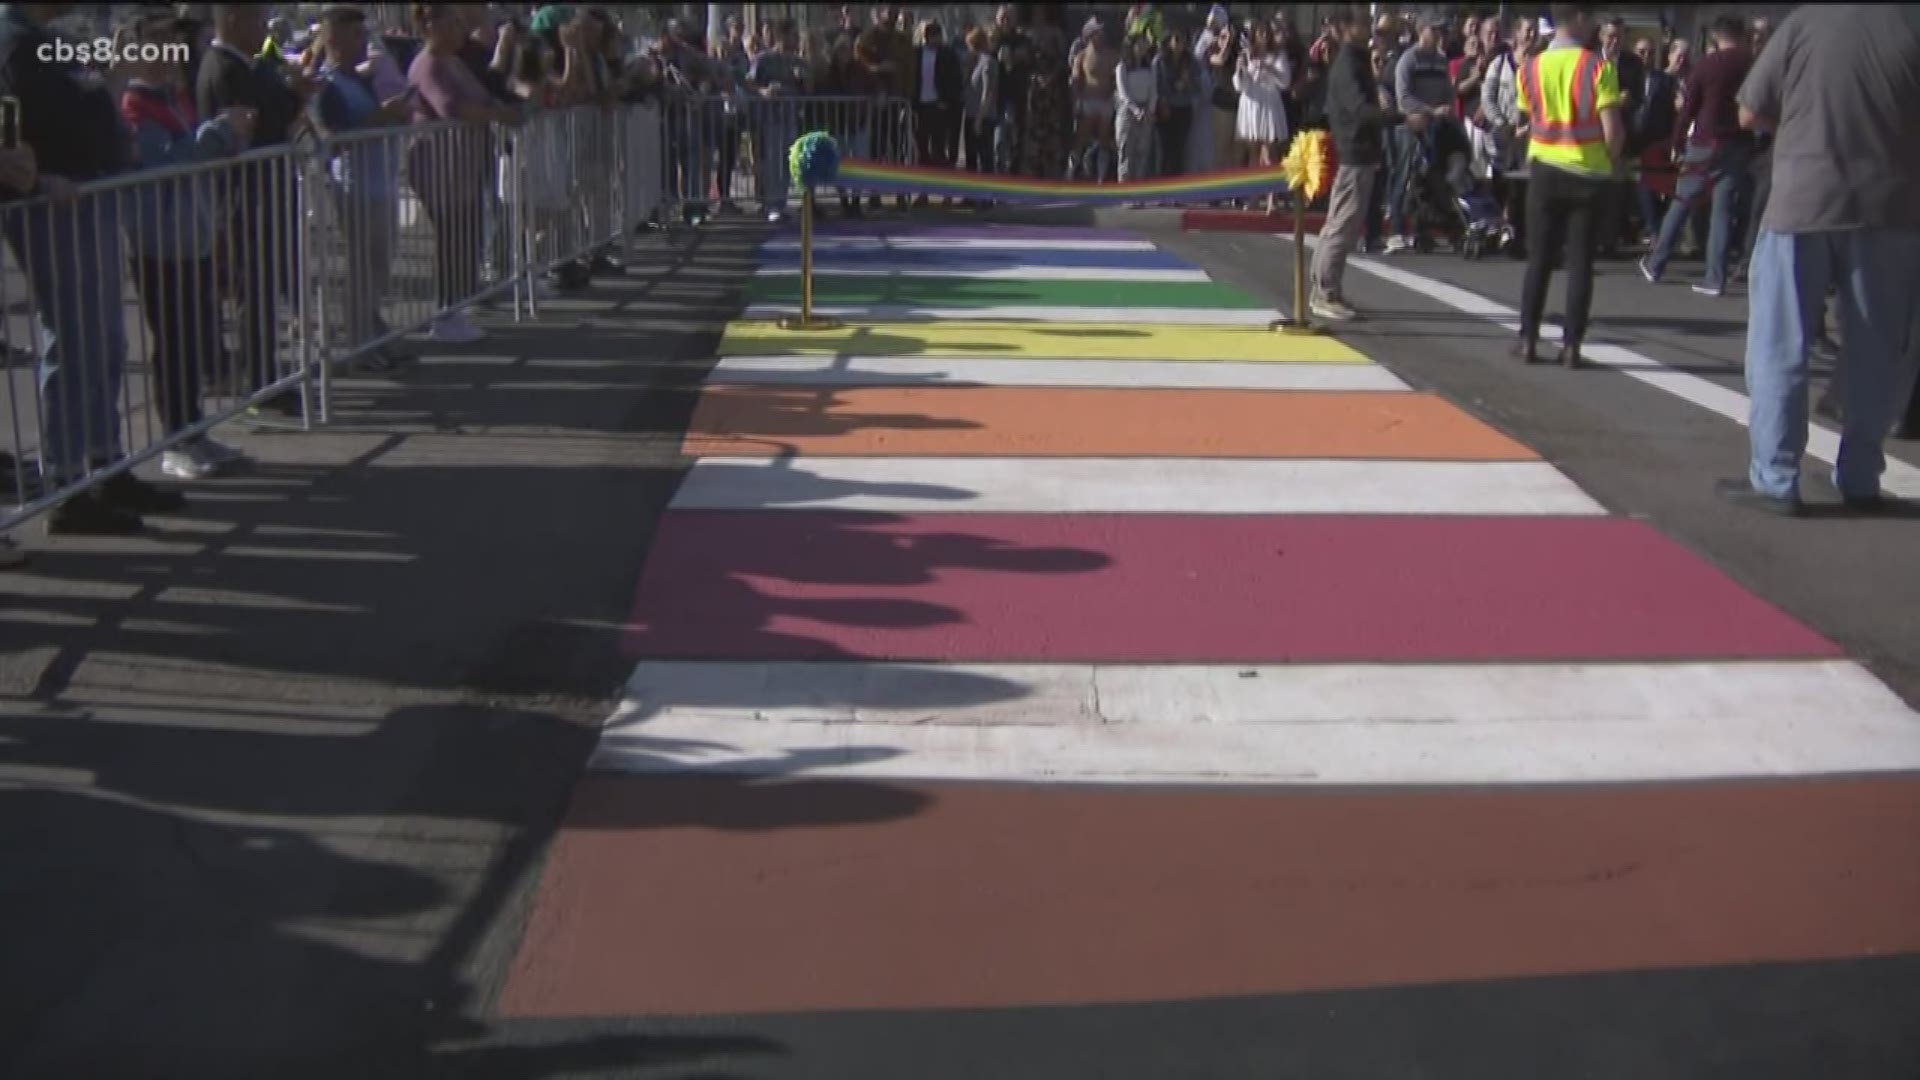 Hundreds of San Diegans joined city leaders to open the first creative crosswalk in the city.